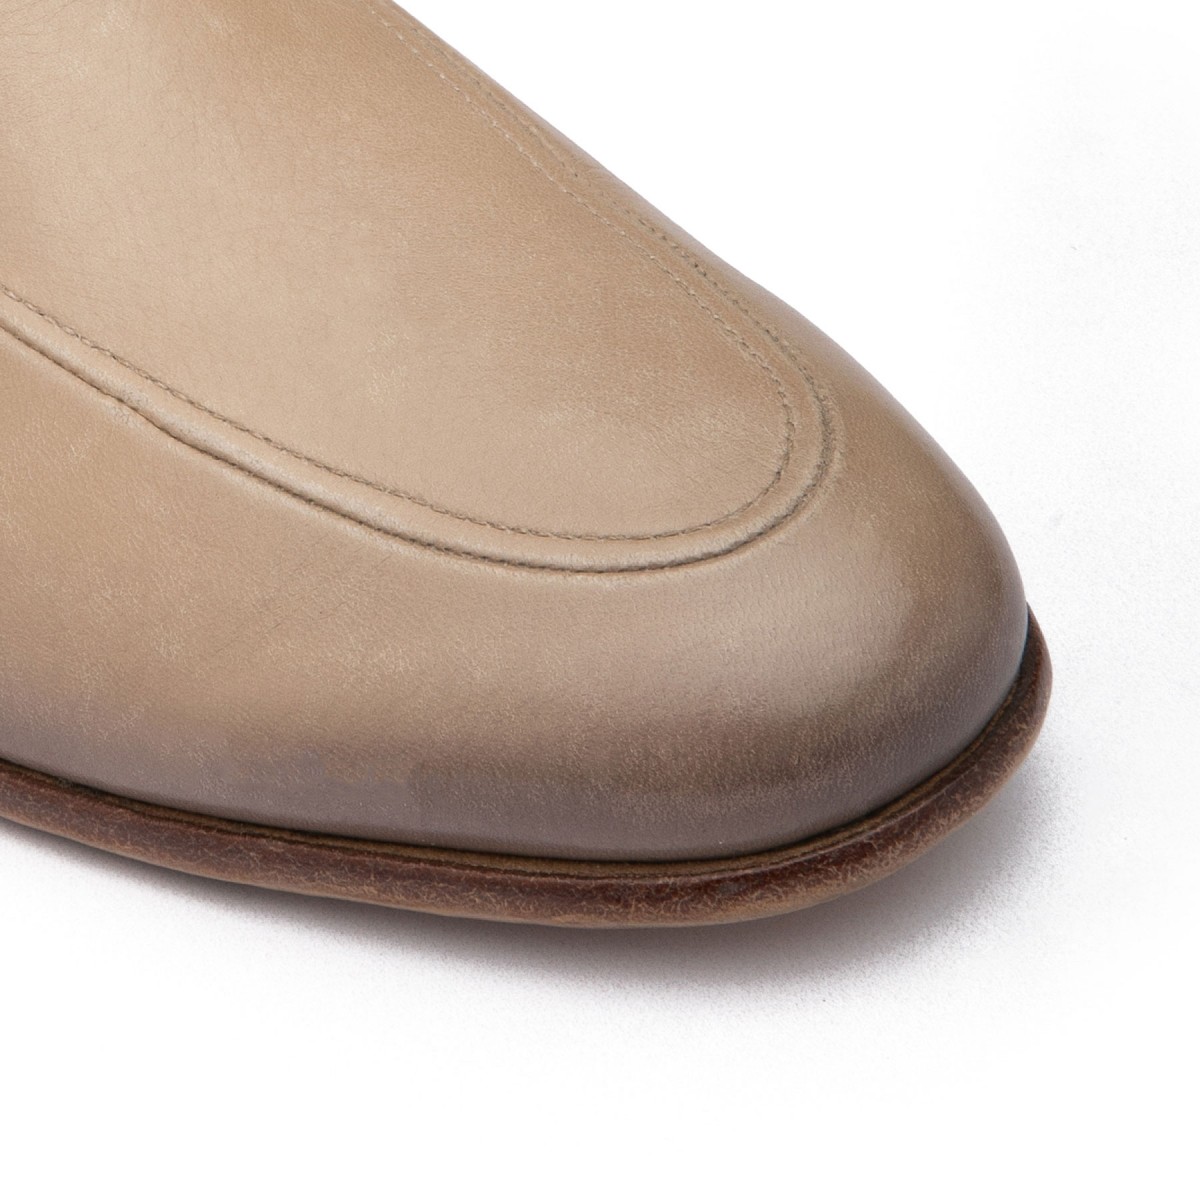 Cream-hue leather loafers